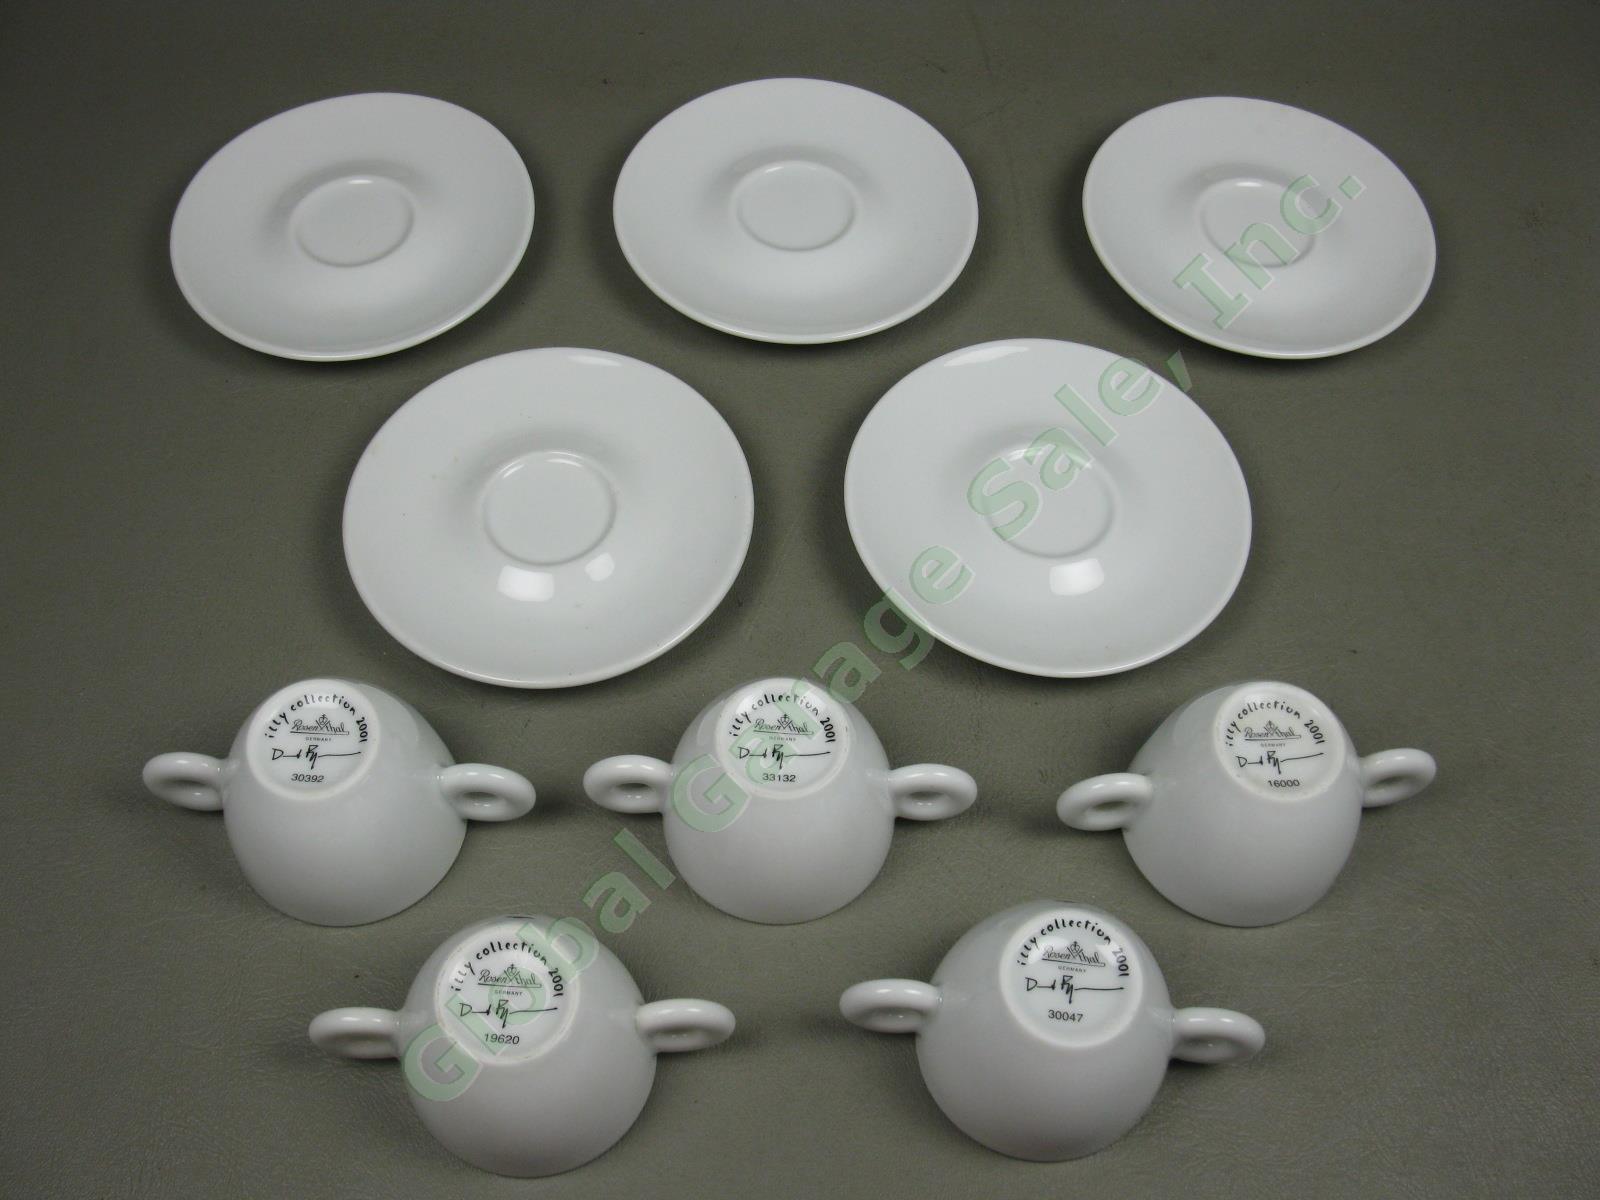 5 Illy Collection David Byrne Alien Espresso Coffee Cups + Saucers Set Lot 2001 2